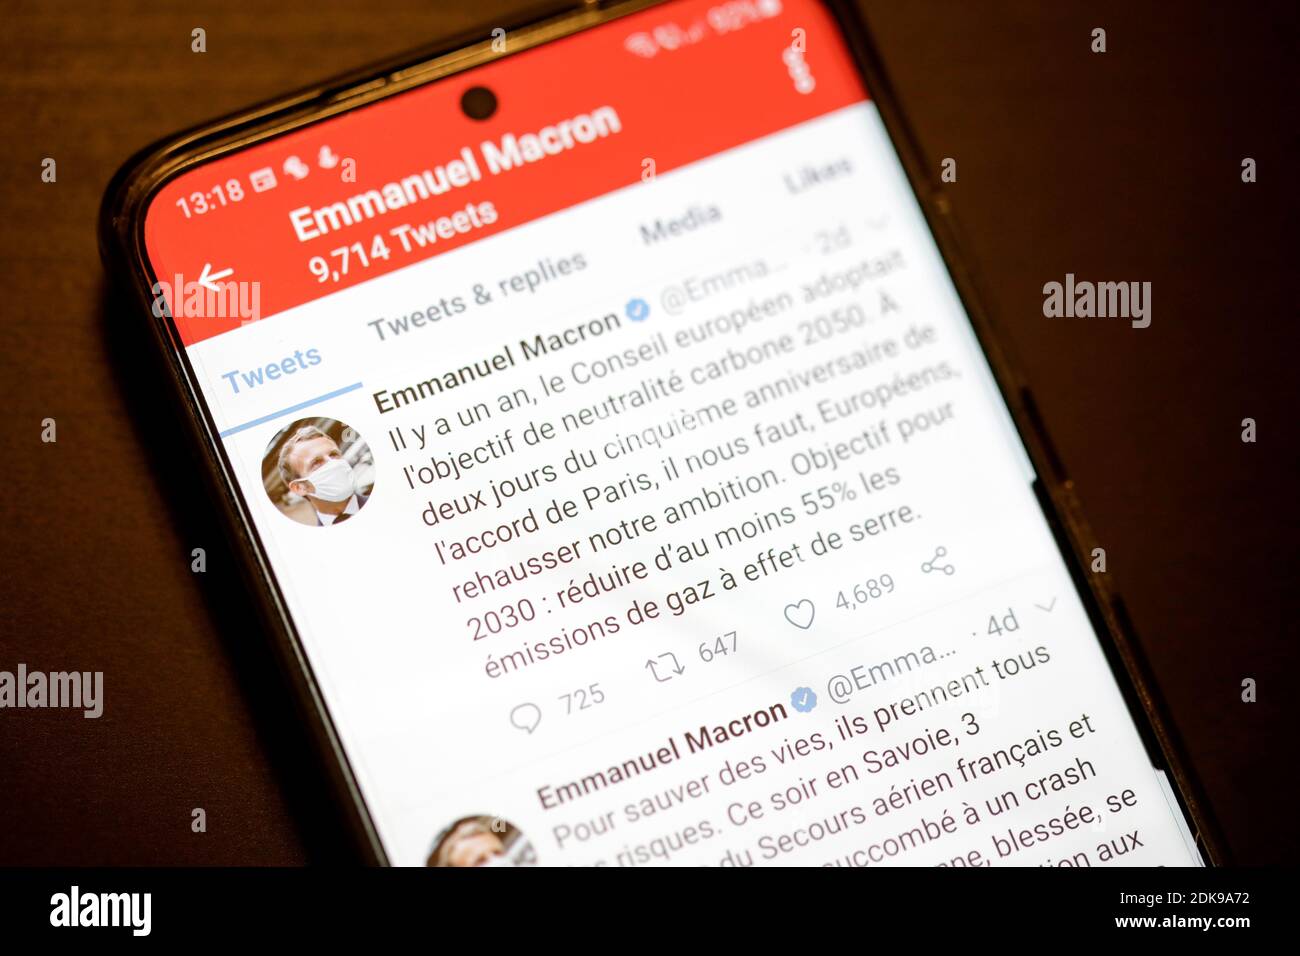 Bucharest, Romania - December 13, 2020: Details with the Twitter account of Emmanuel Macron on a mobile device screen. Stock Photo